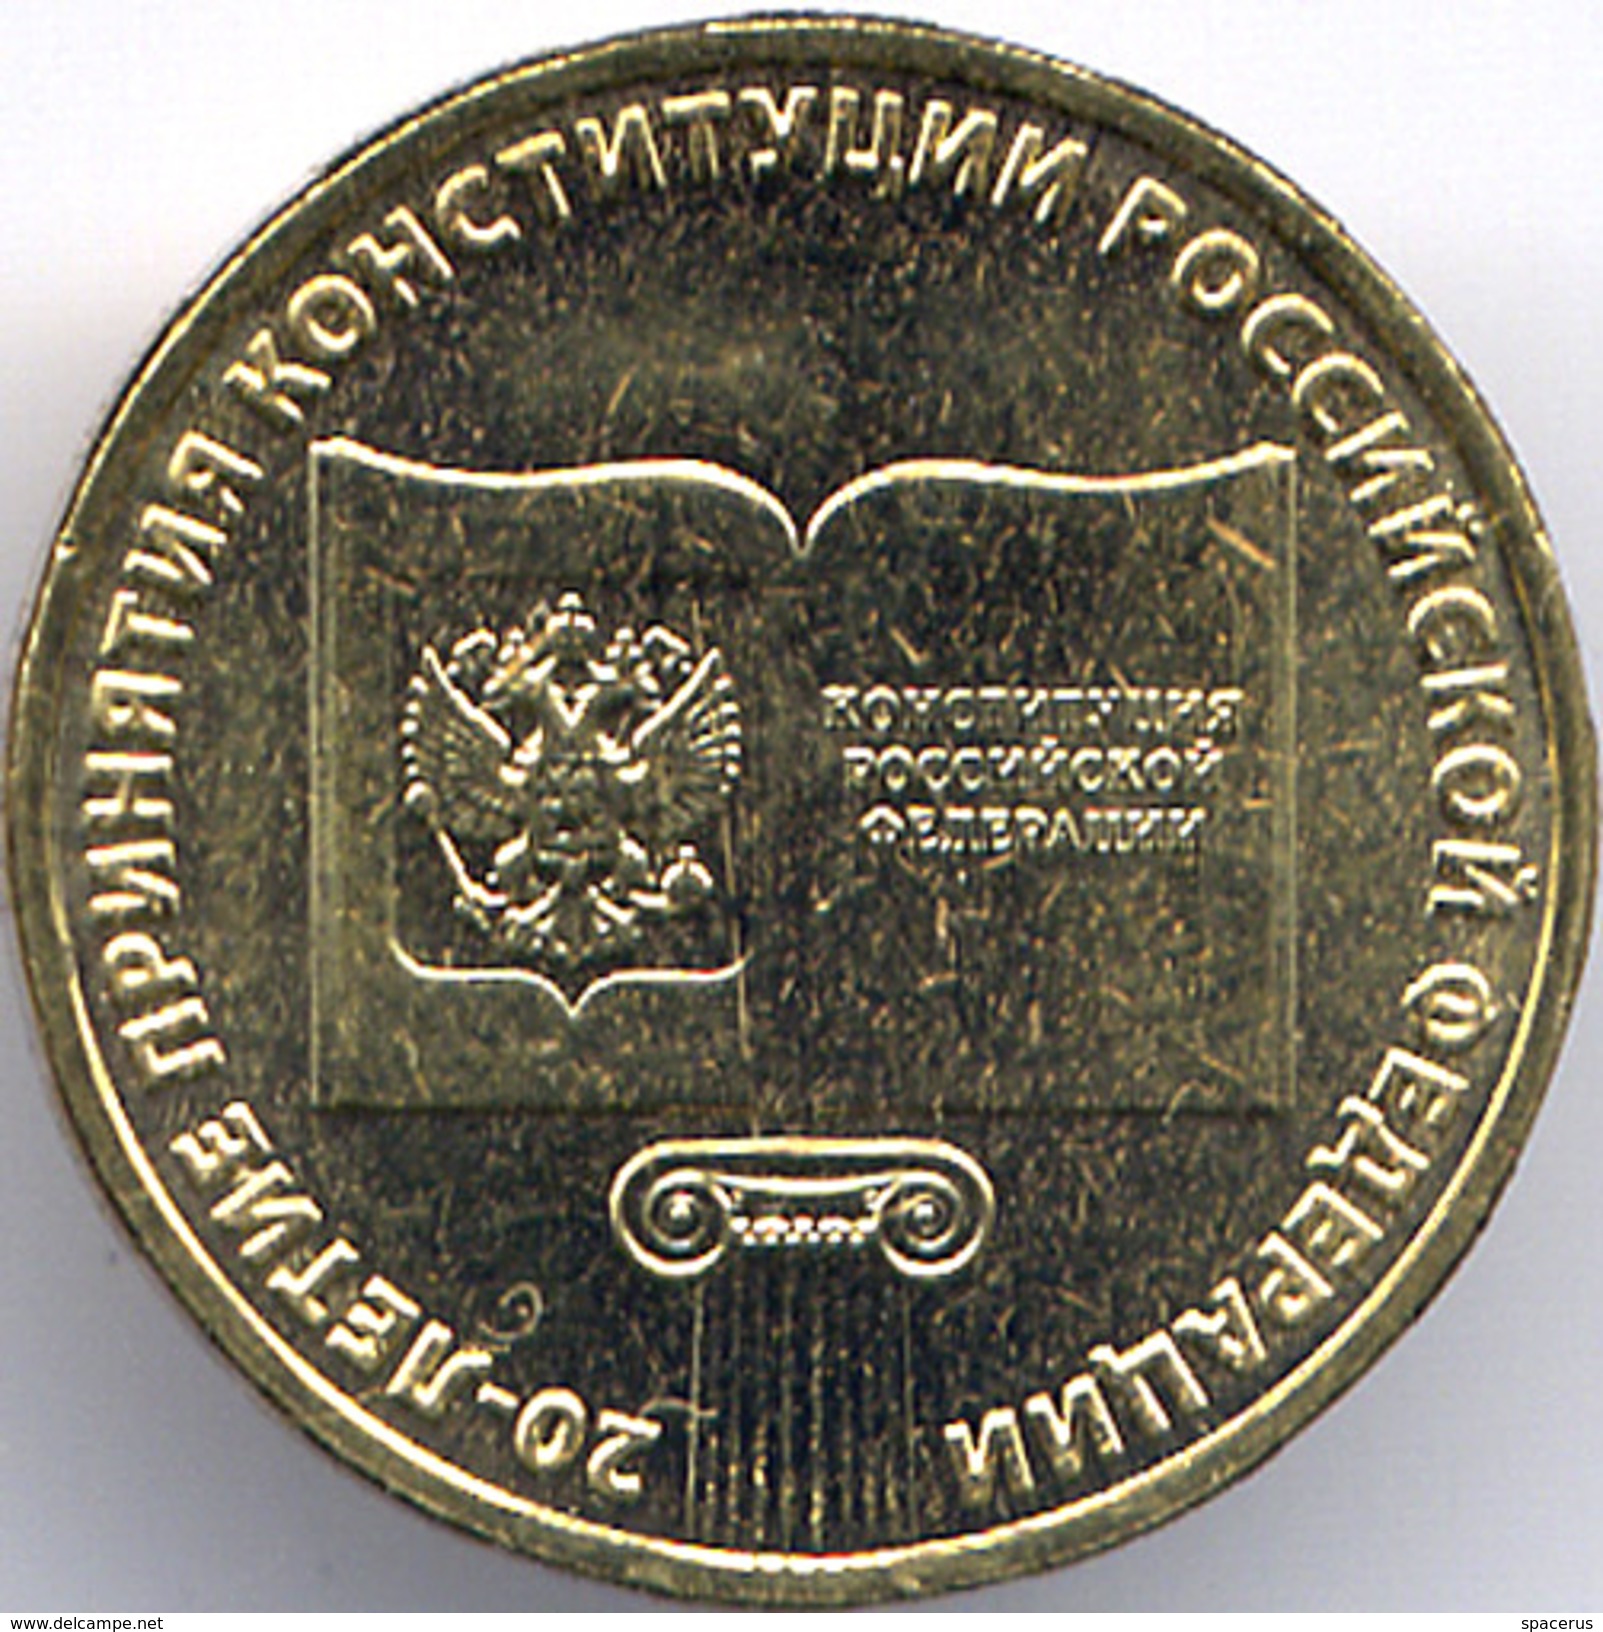 6 RUSSIA Coin 2013 10 ROUBLES The Russian Constitution 20 Anniversary (1 Coin) - Russia